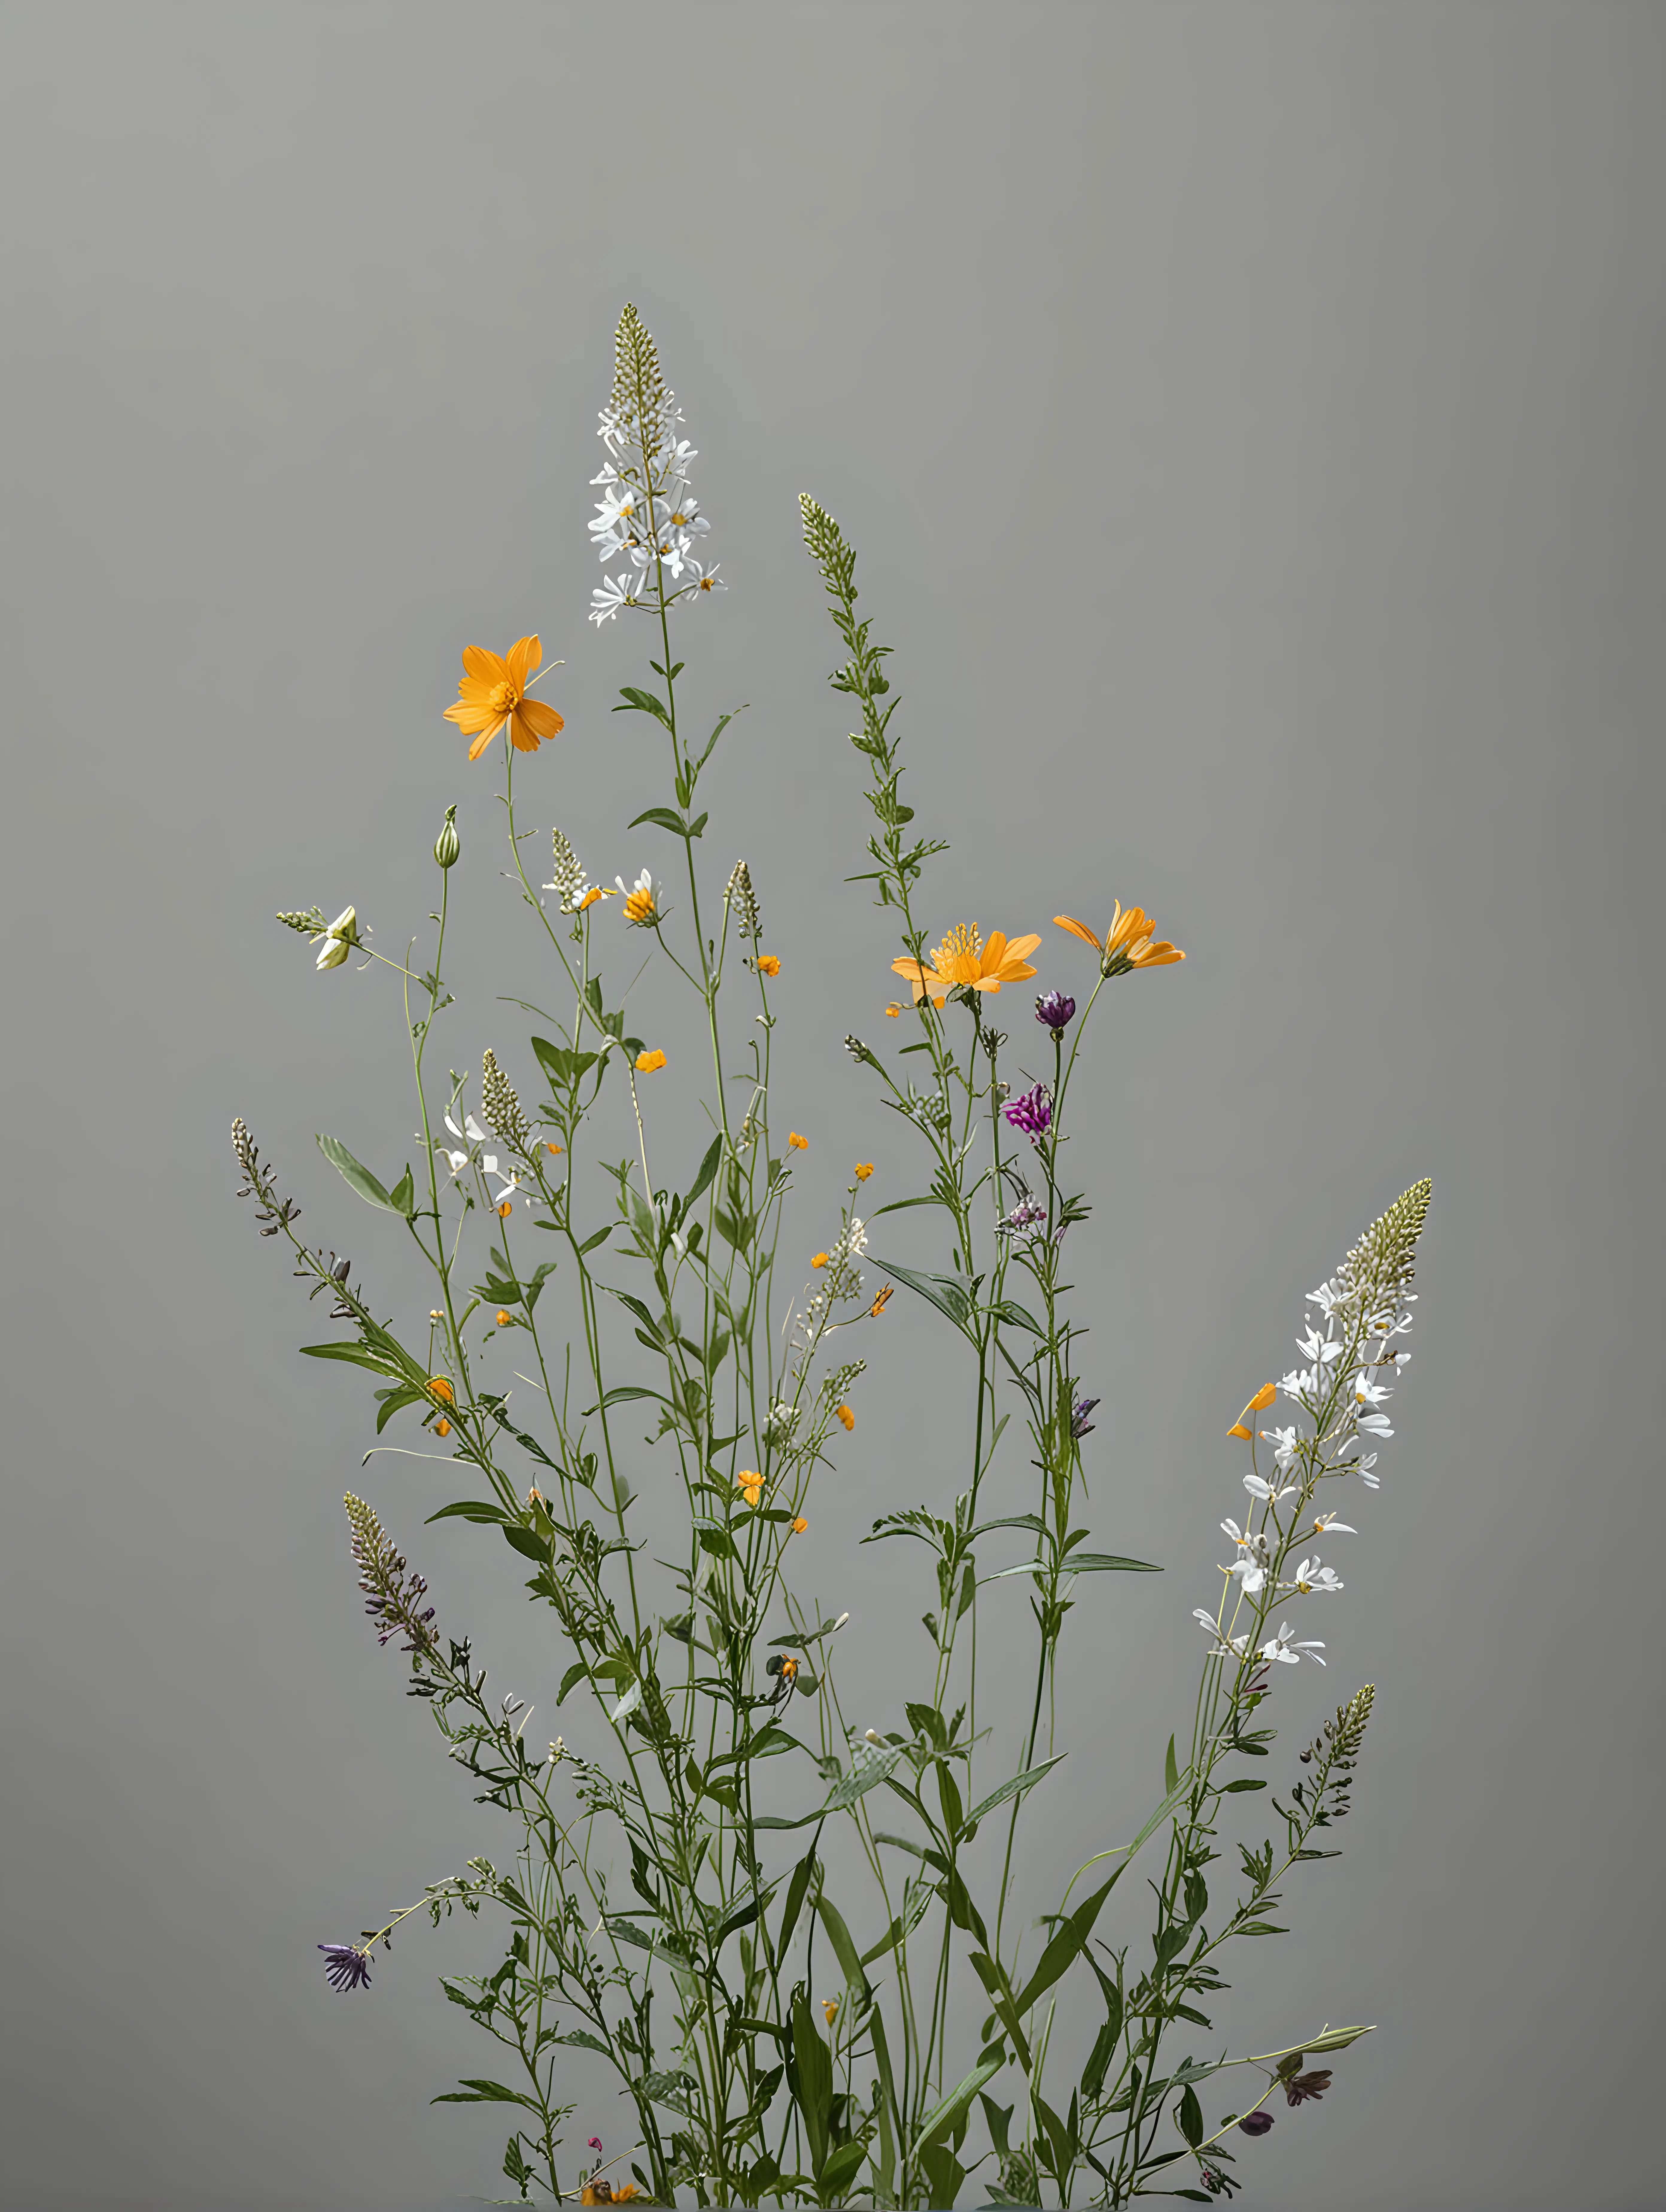 Colorful Wildflowers Against Neutral Gray Background